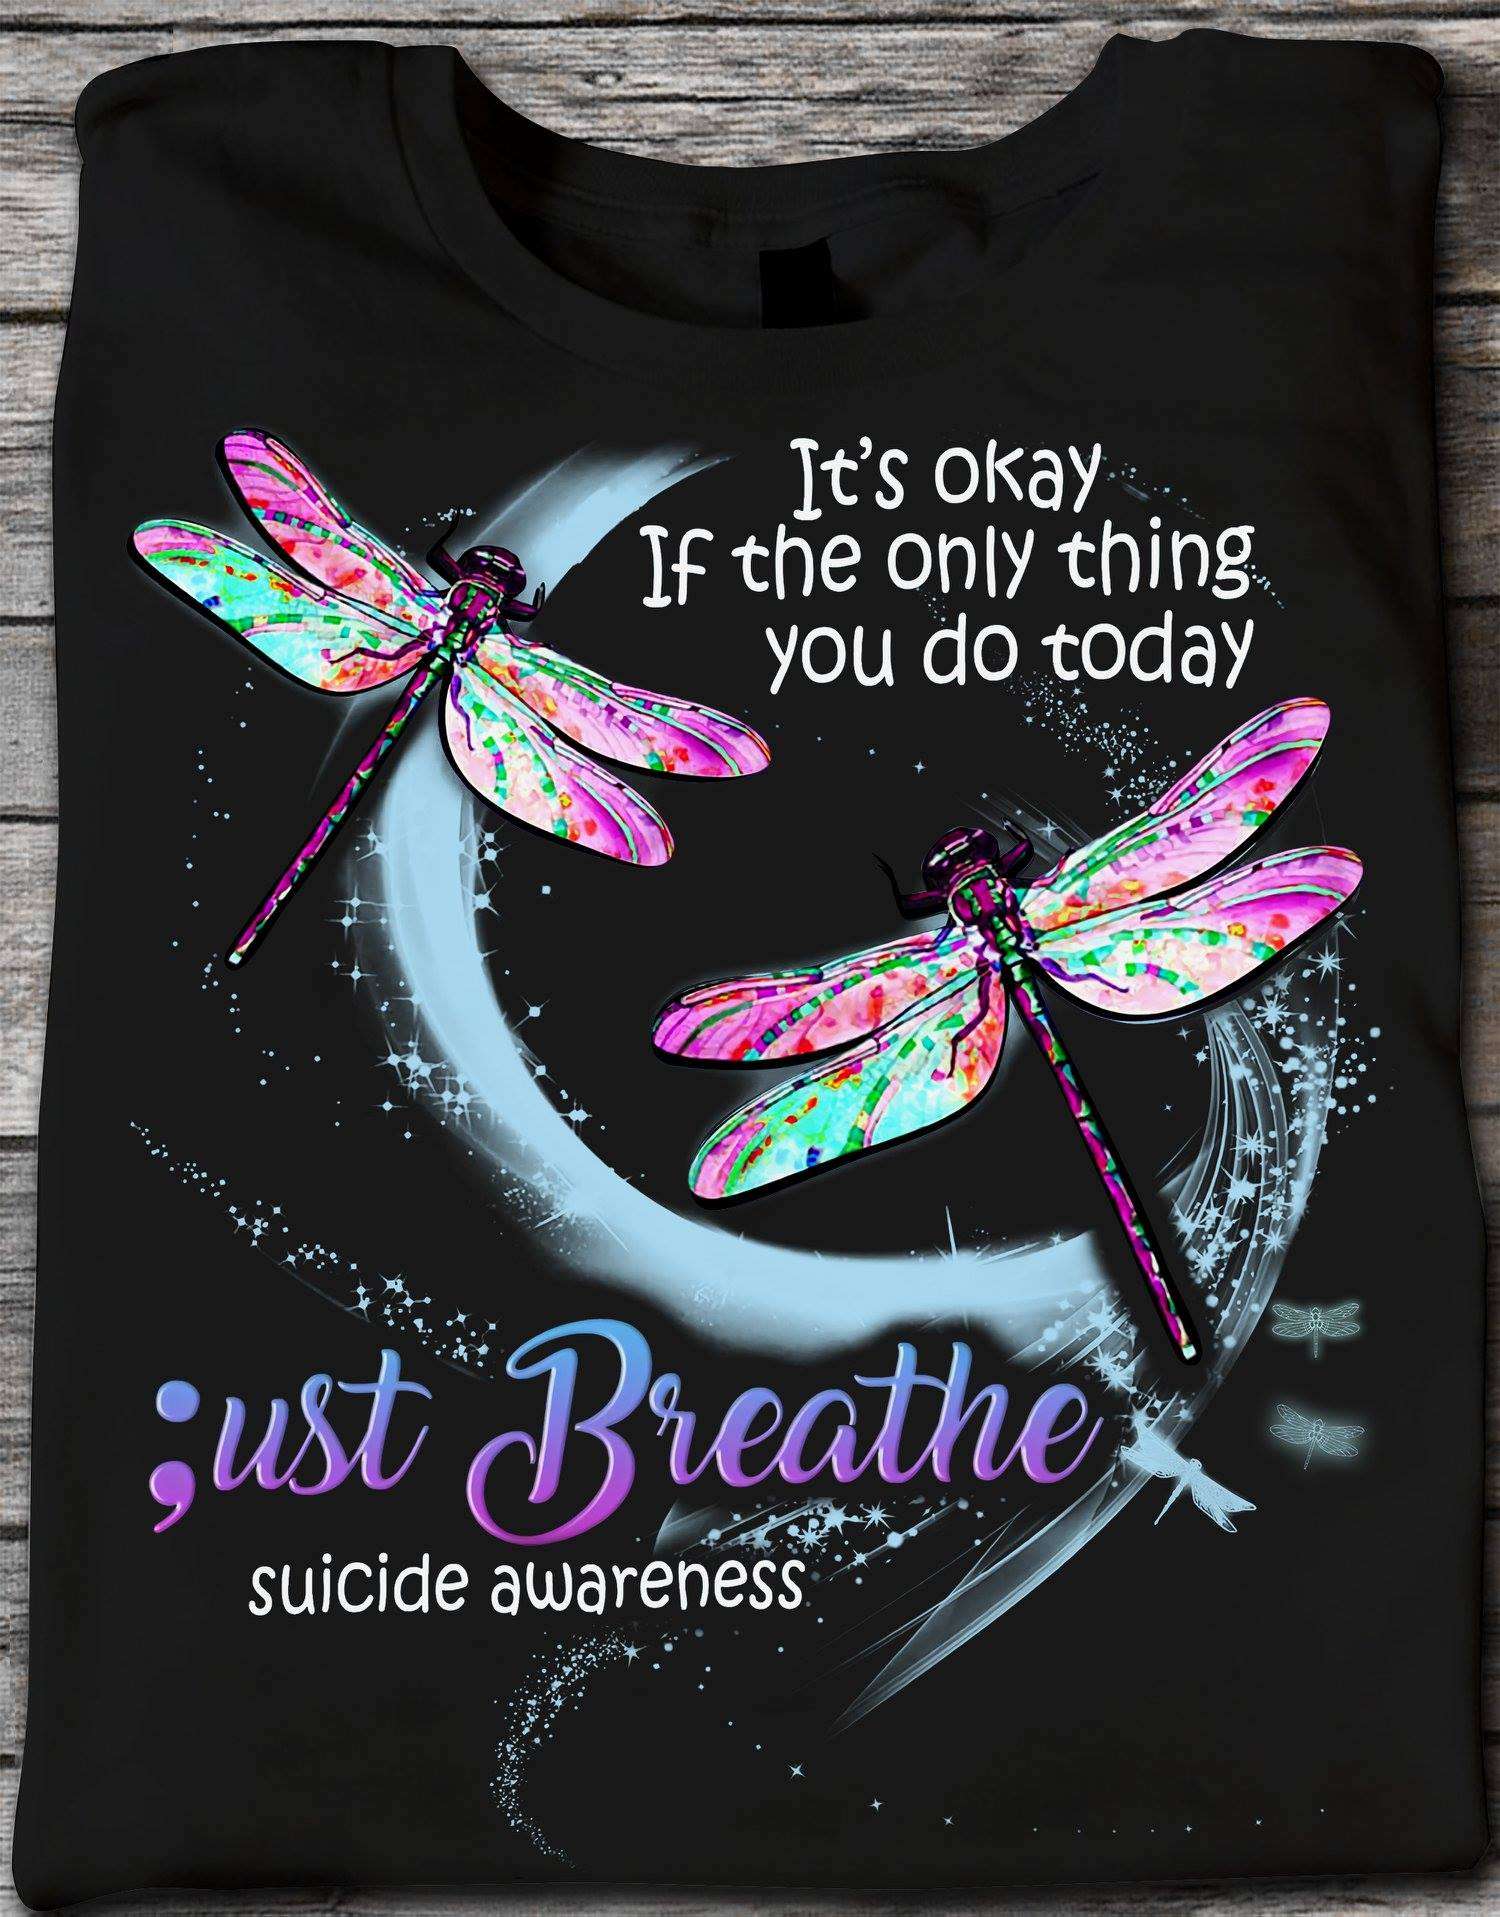 Dragonfly Suicide - It's okay if the only thing you do today just breathe suicide awareness